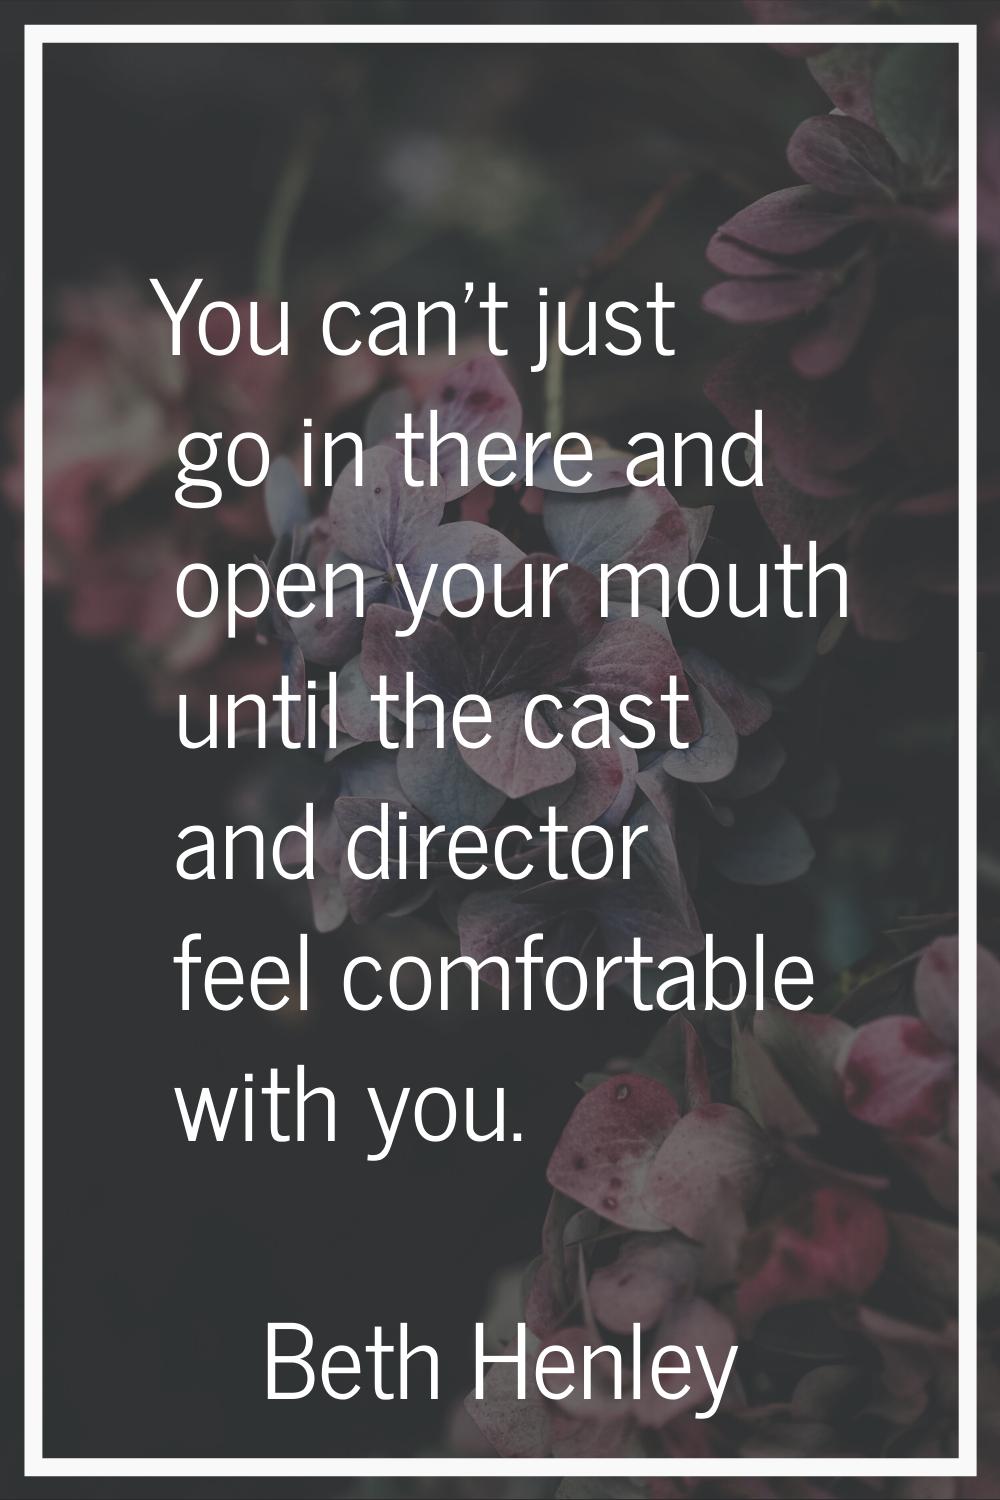 You can't just go in there and open your mouth until the cast and director feel comfortable with yo